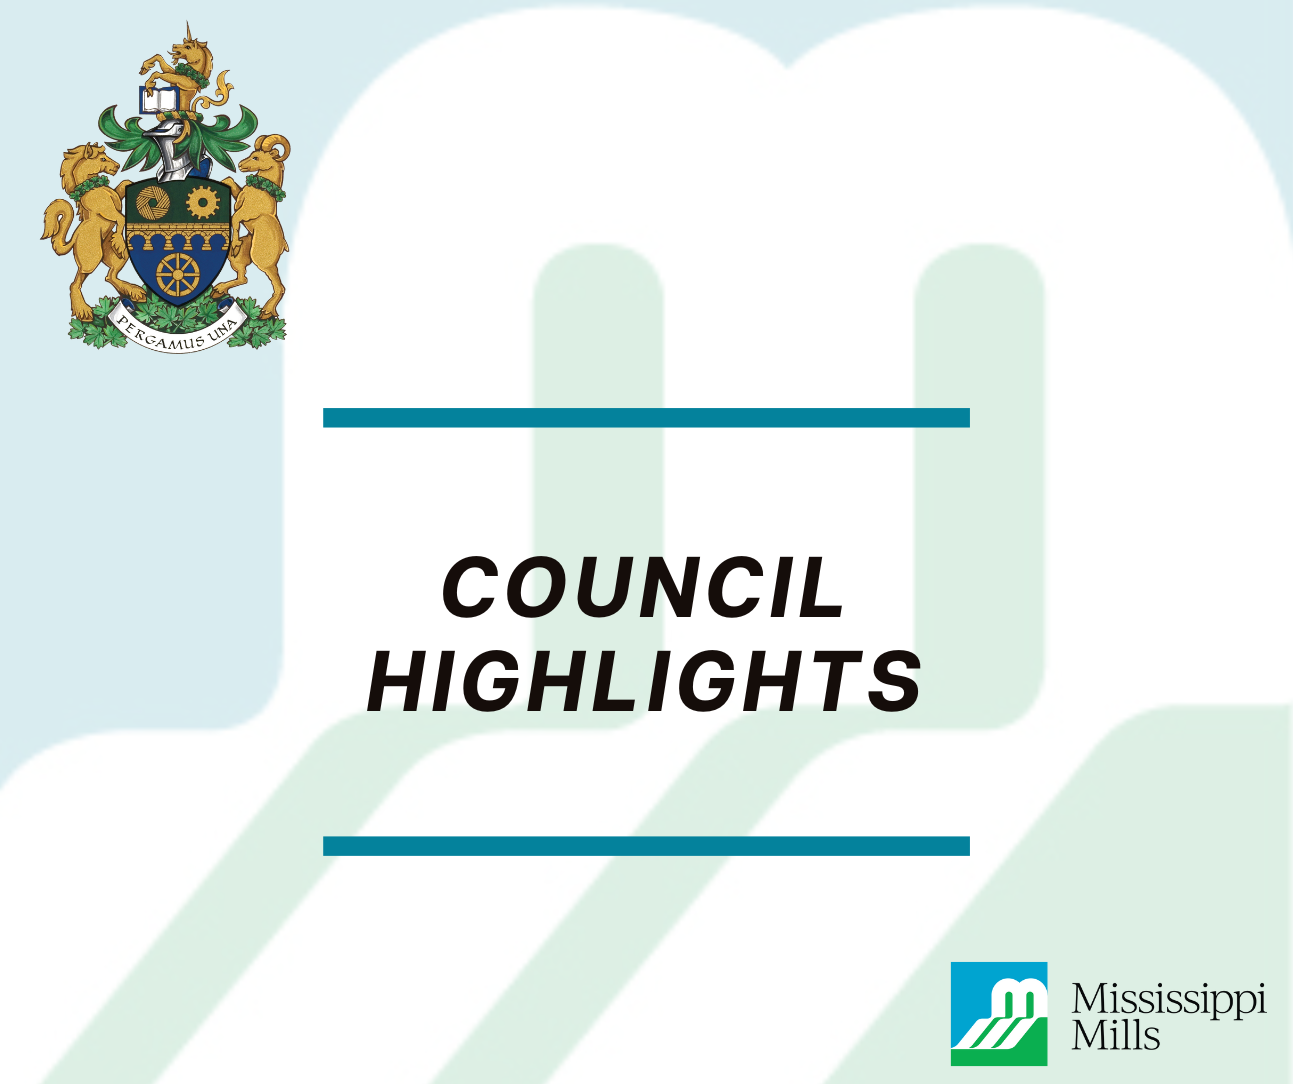 Blue, green and white graphic featuring text 'Council Highlights'